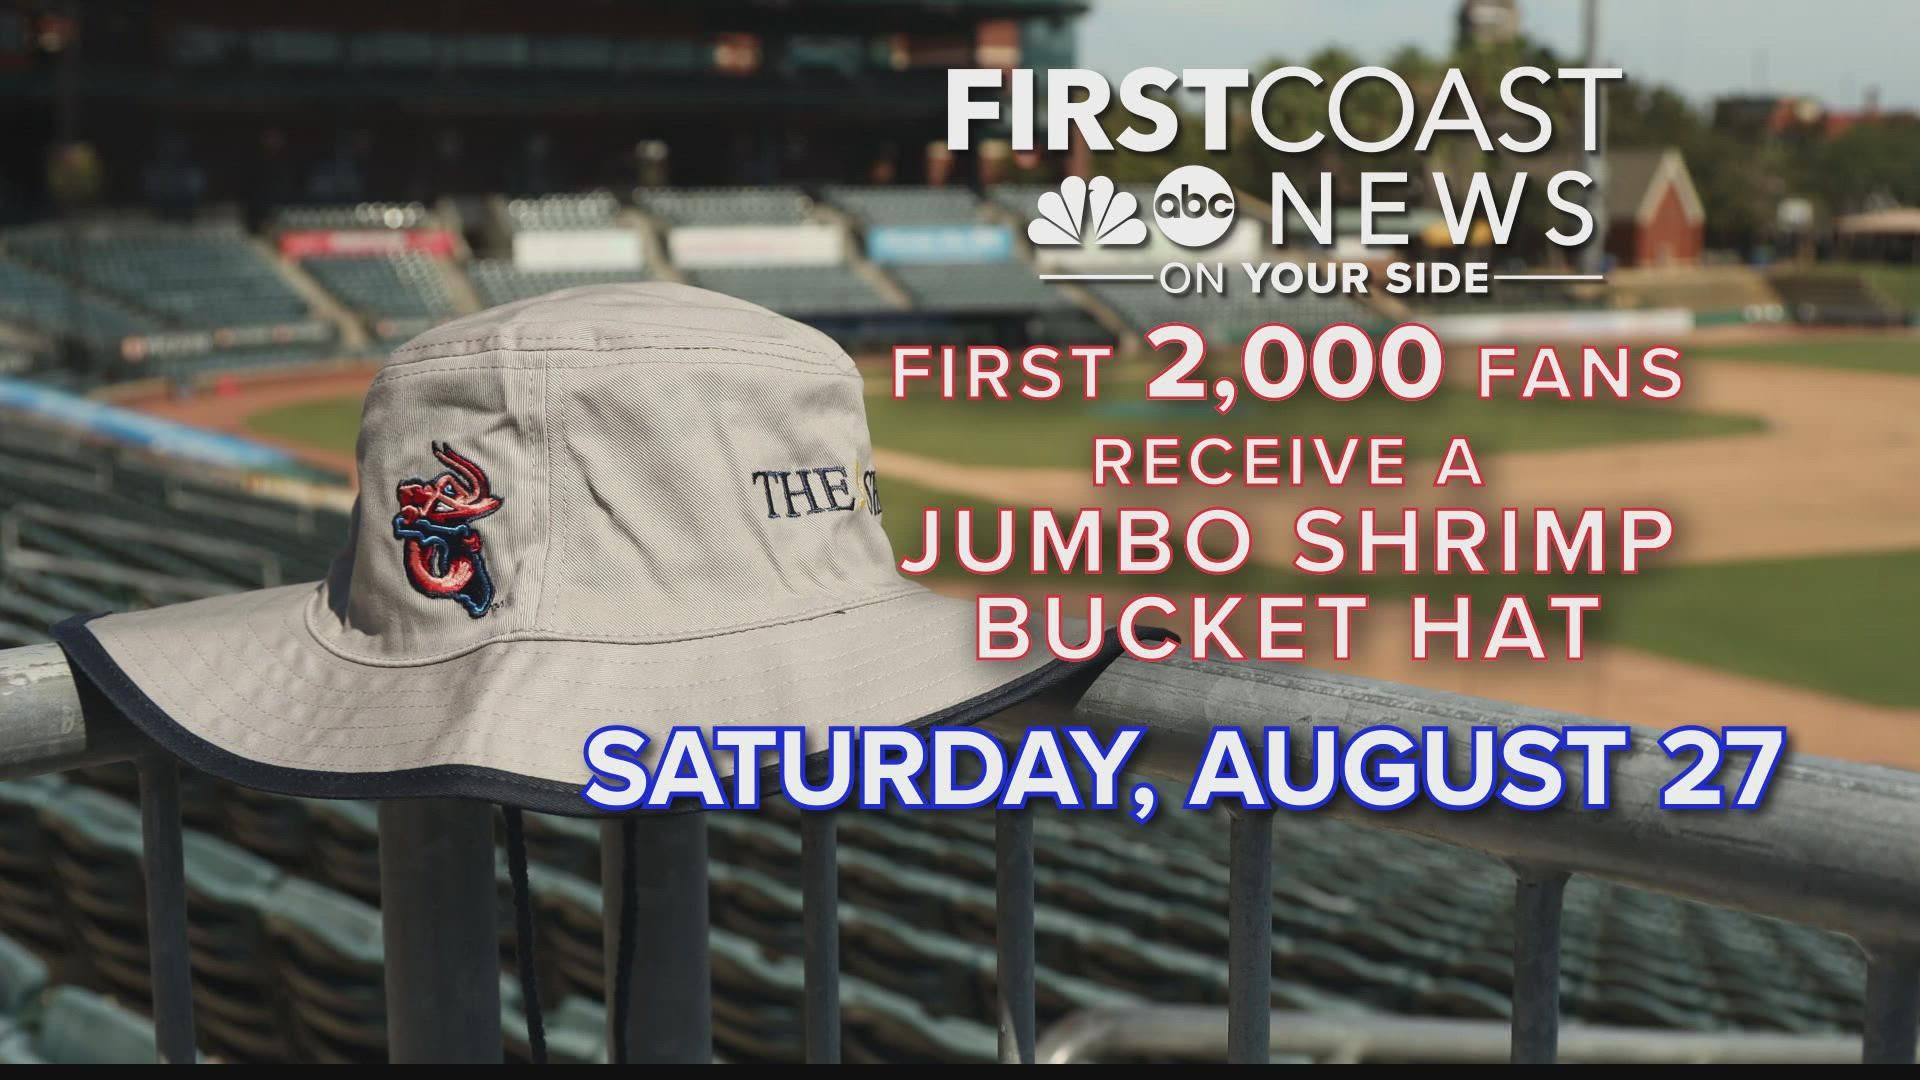 On Saturday, see Chris Porter fire a heater across the plate for the first pitch and get there early for a Jumbo Shrimp bucket hat.